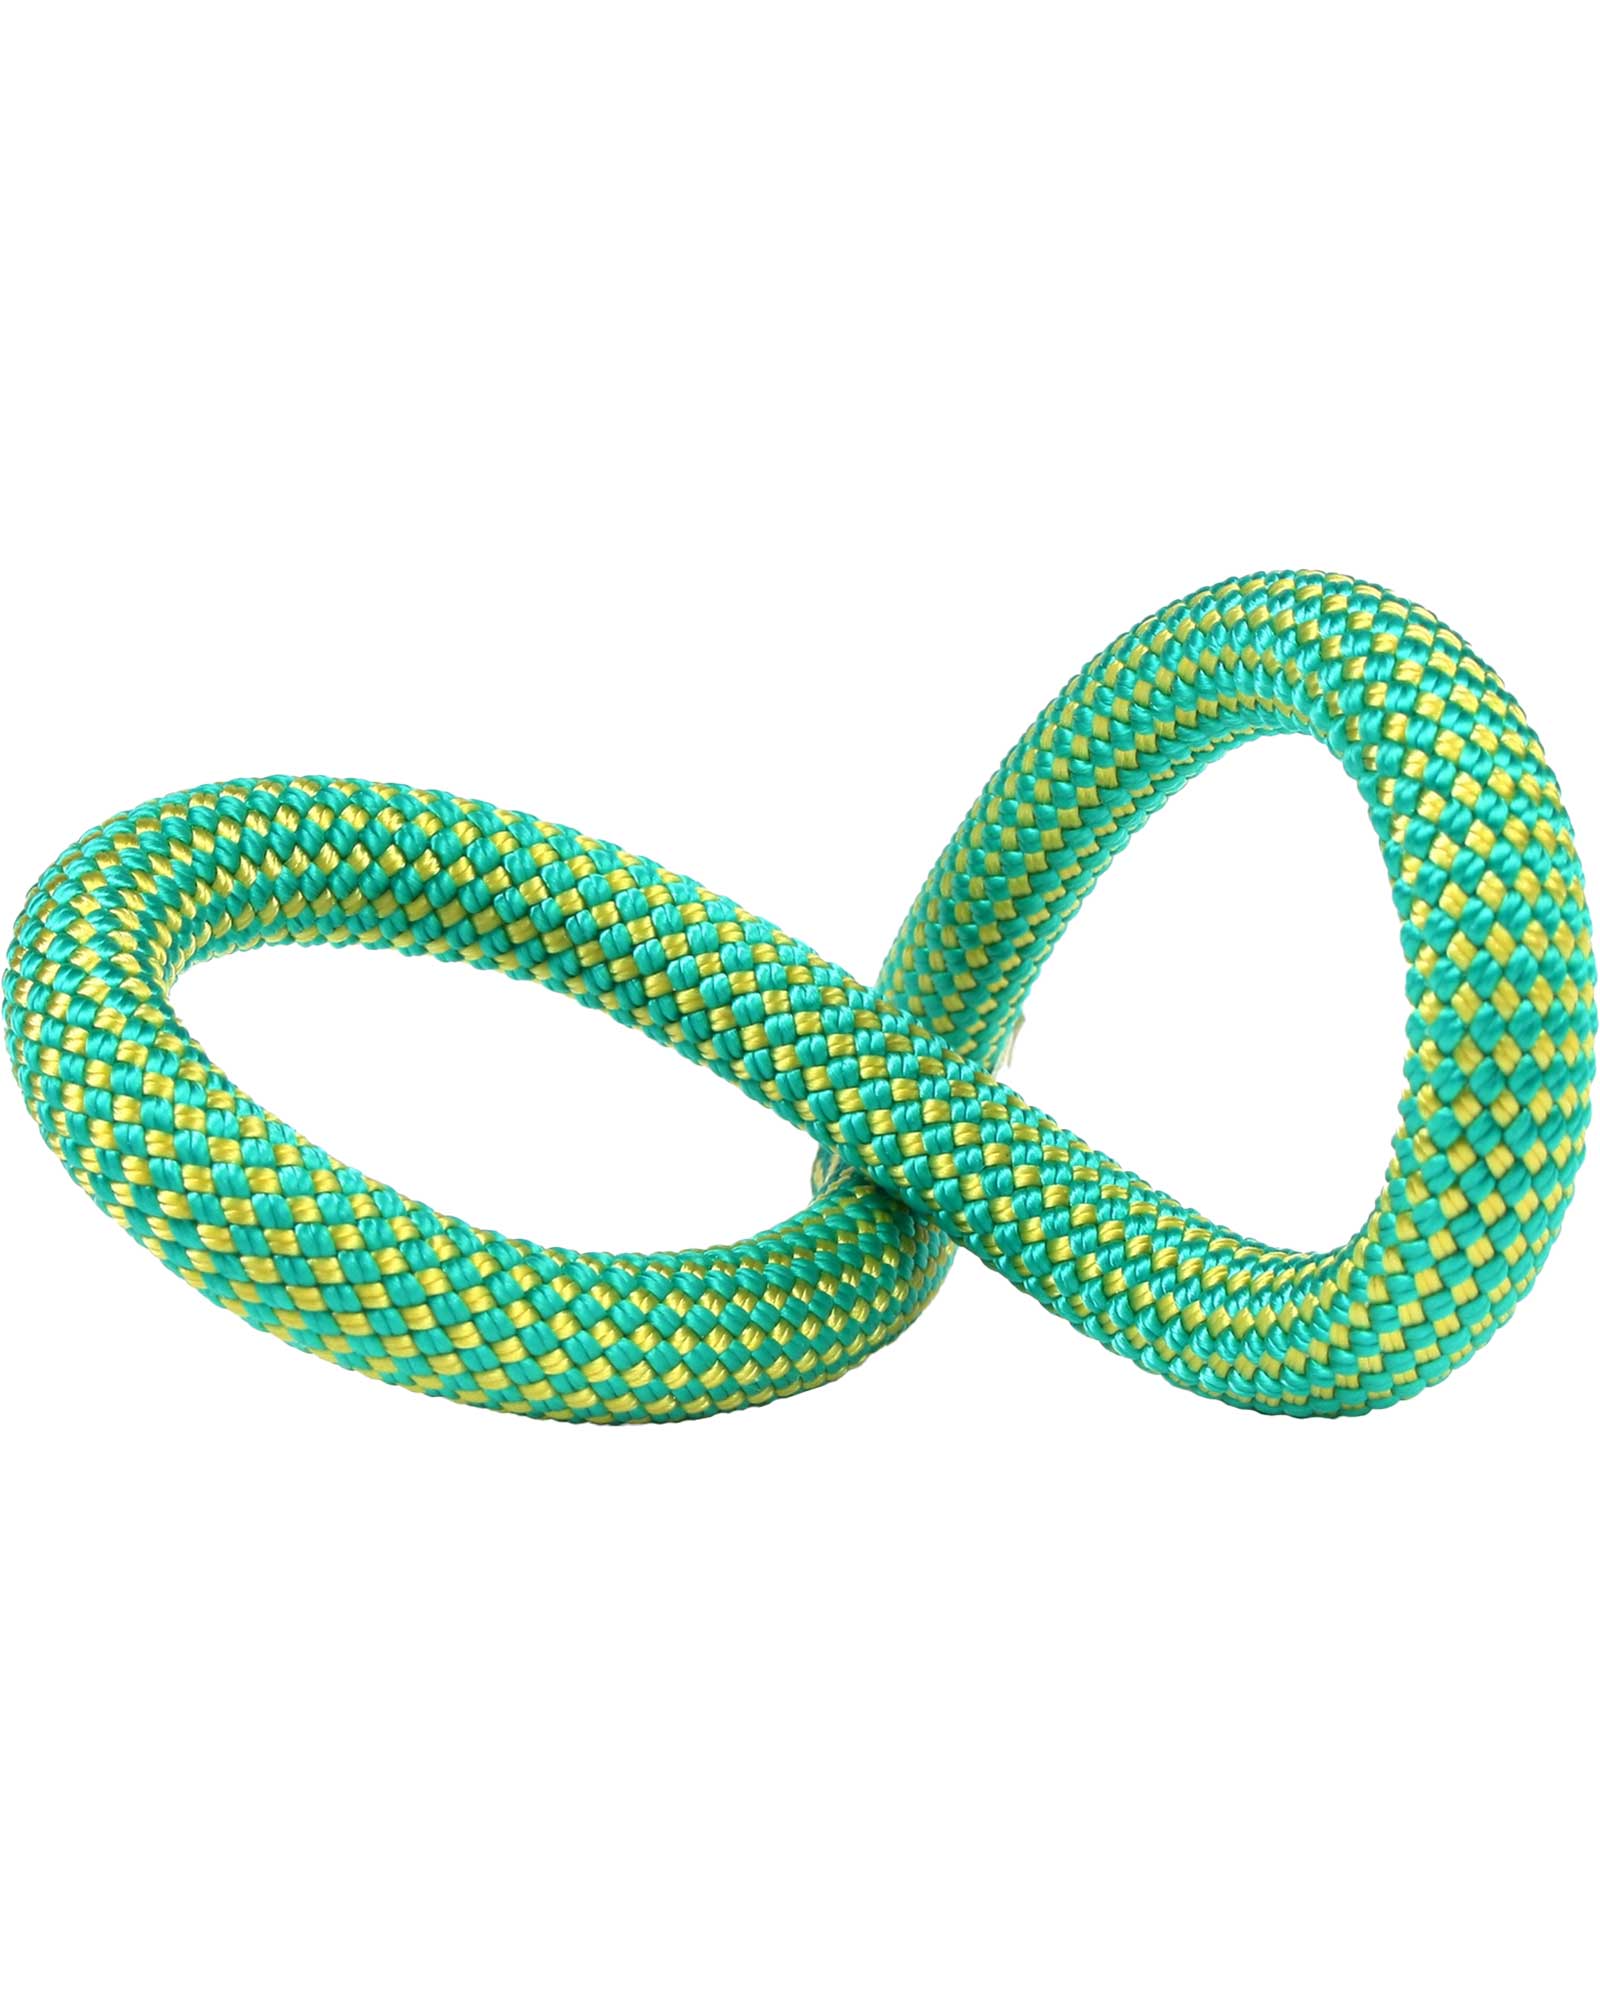 Edelweiss Performance Unicore Supereverdry 9.2mm x 80m Rope - Green 80m